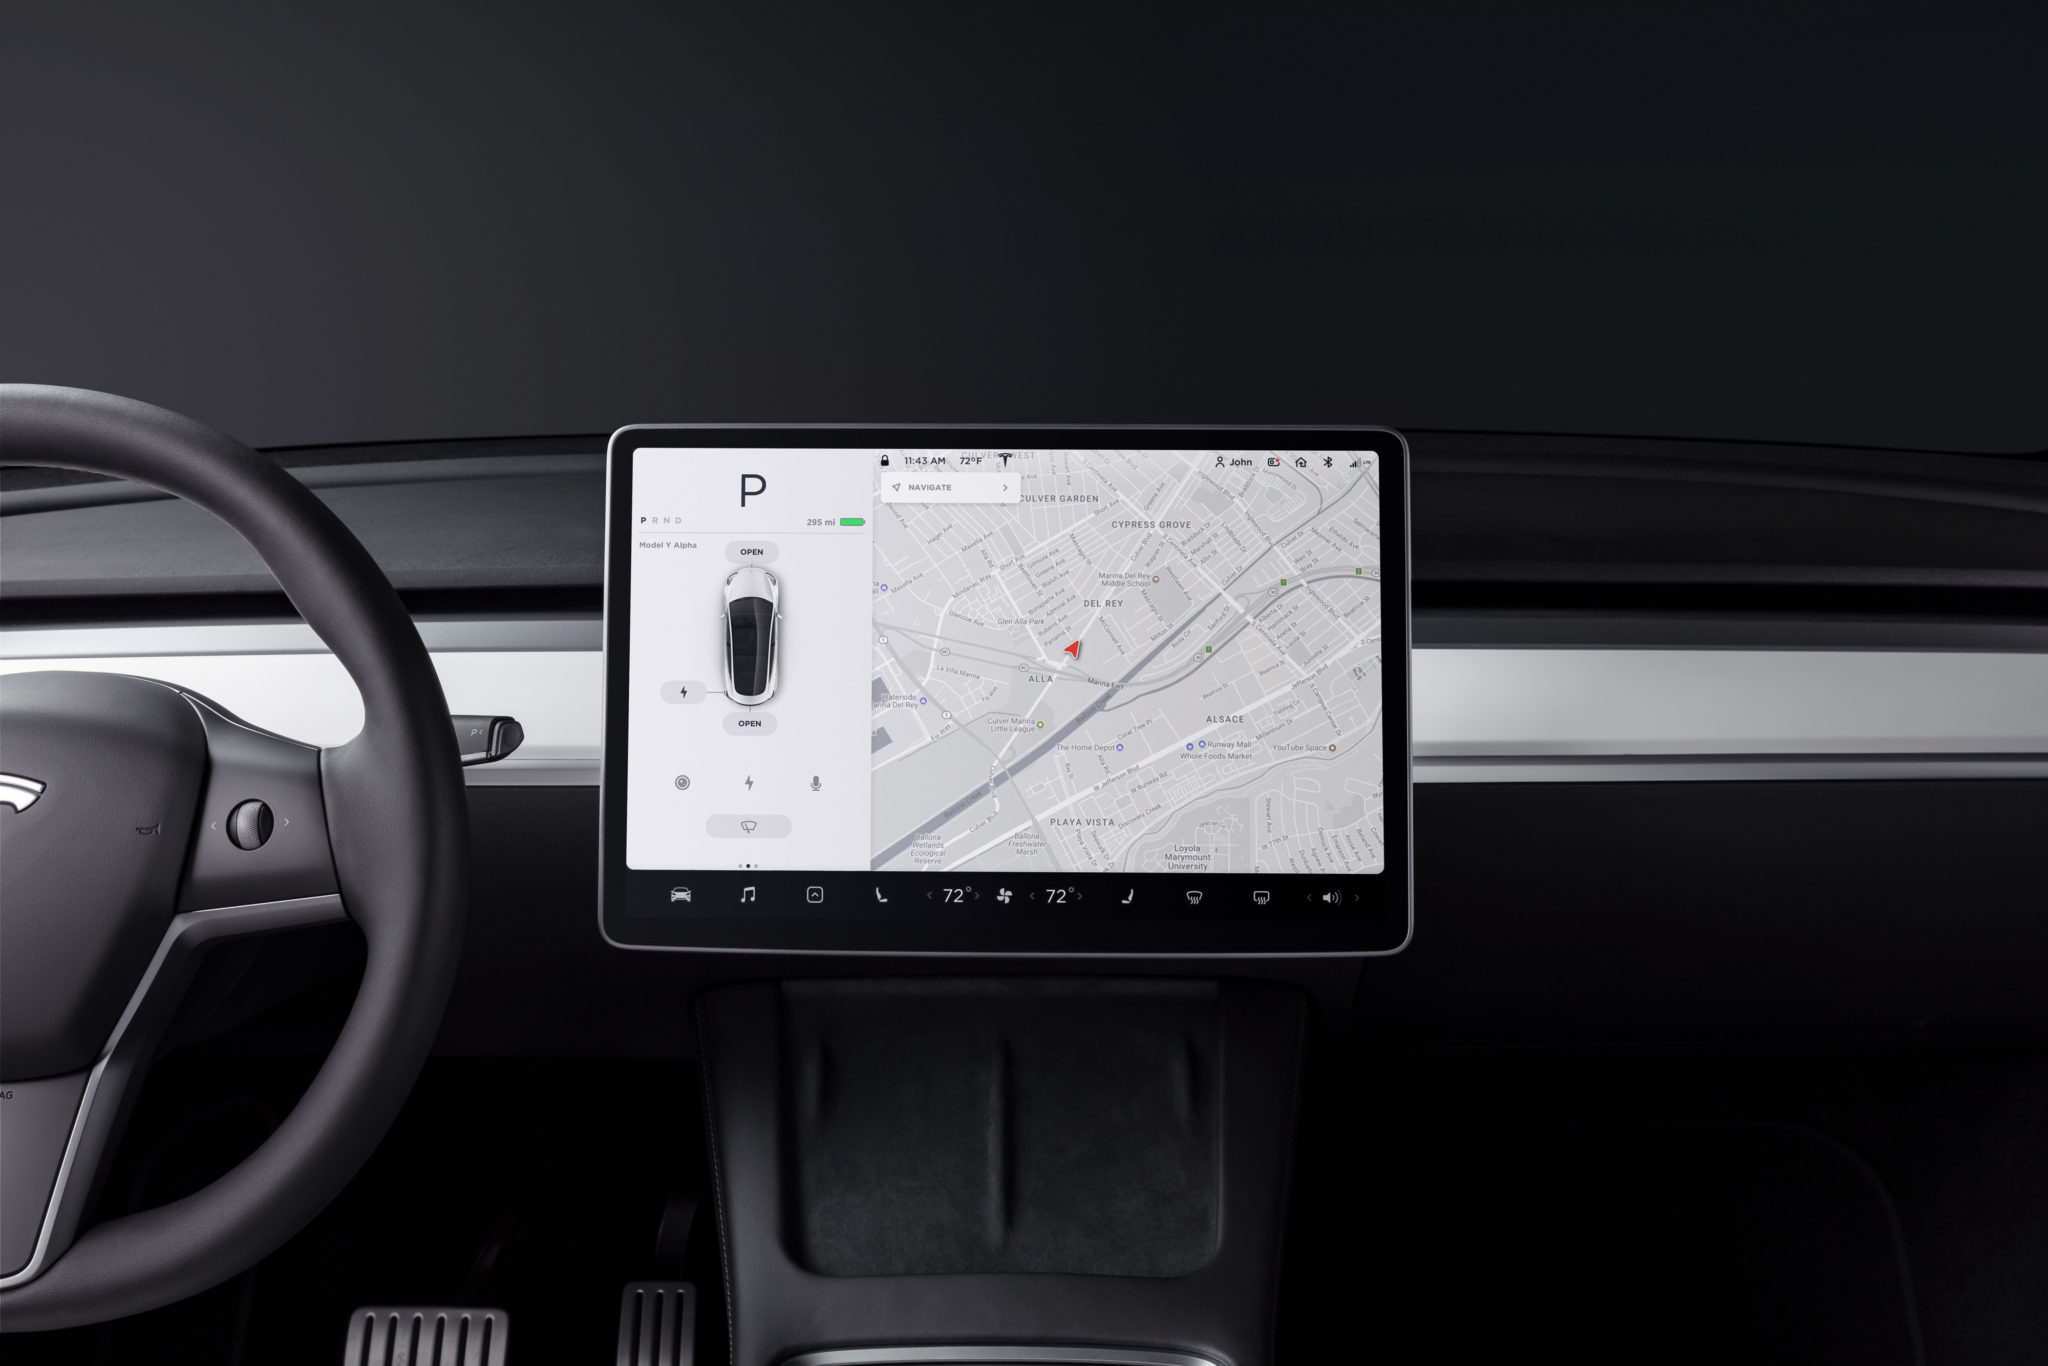 Why you need a screen protector for the Tesla Model Y touchscreen